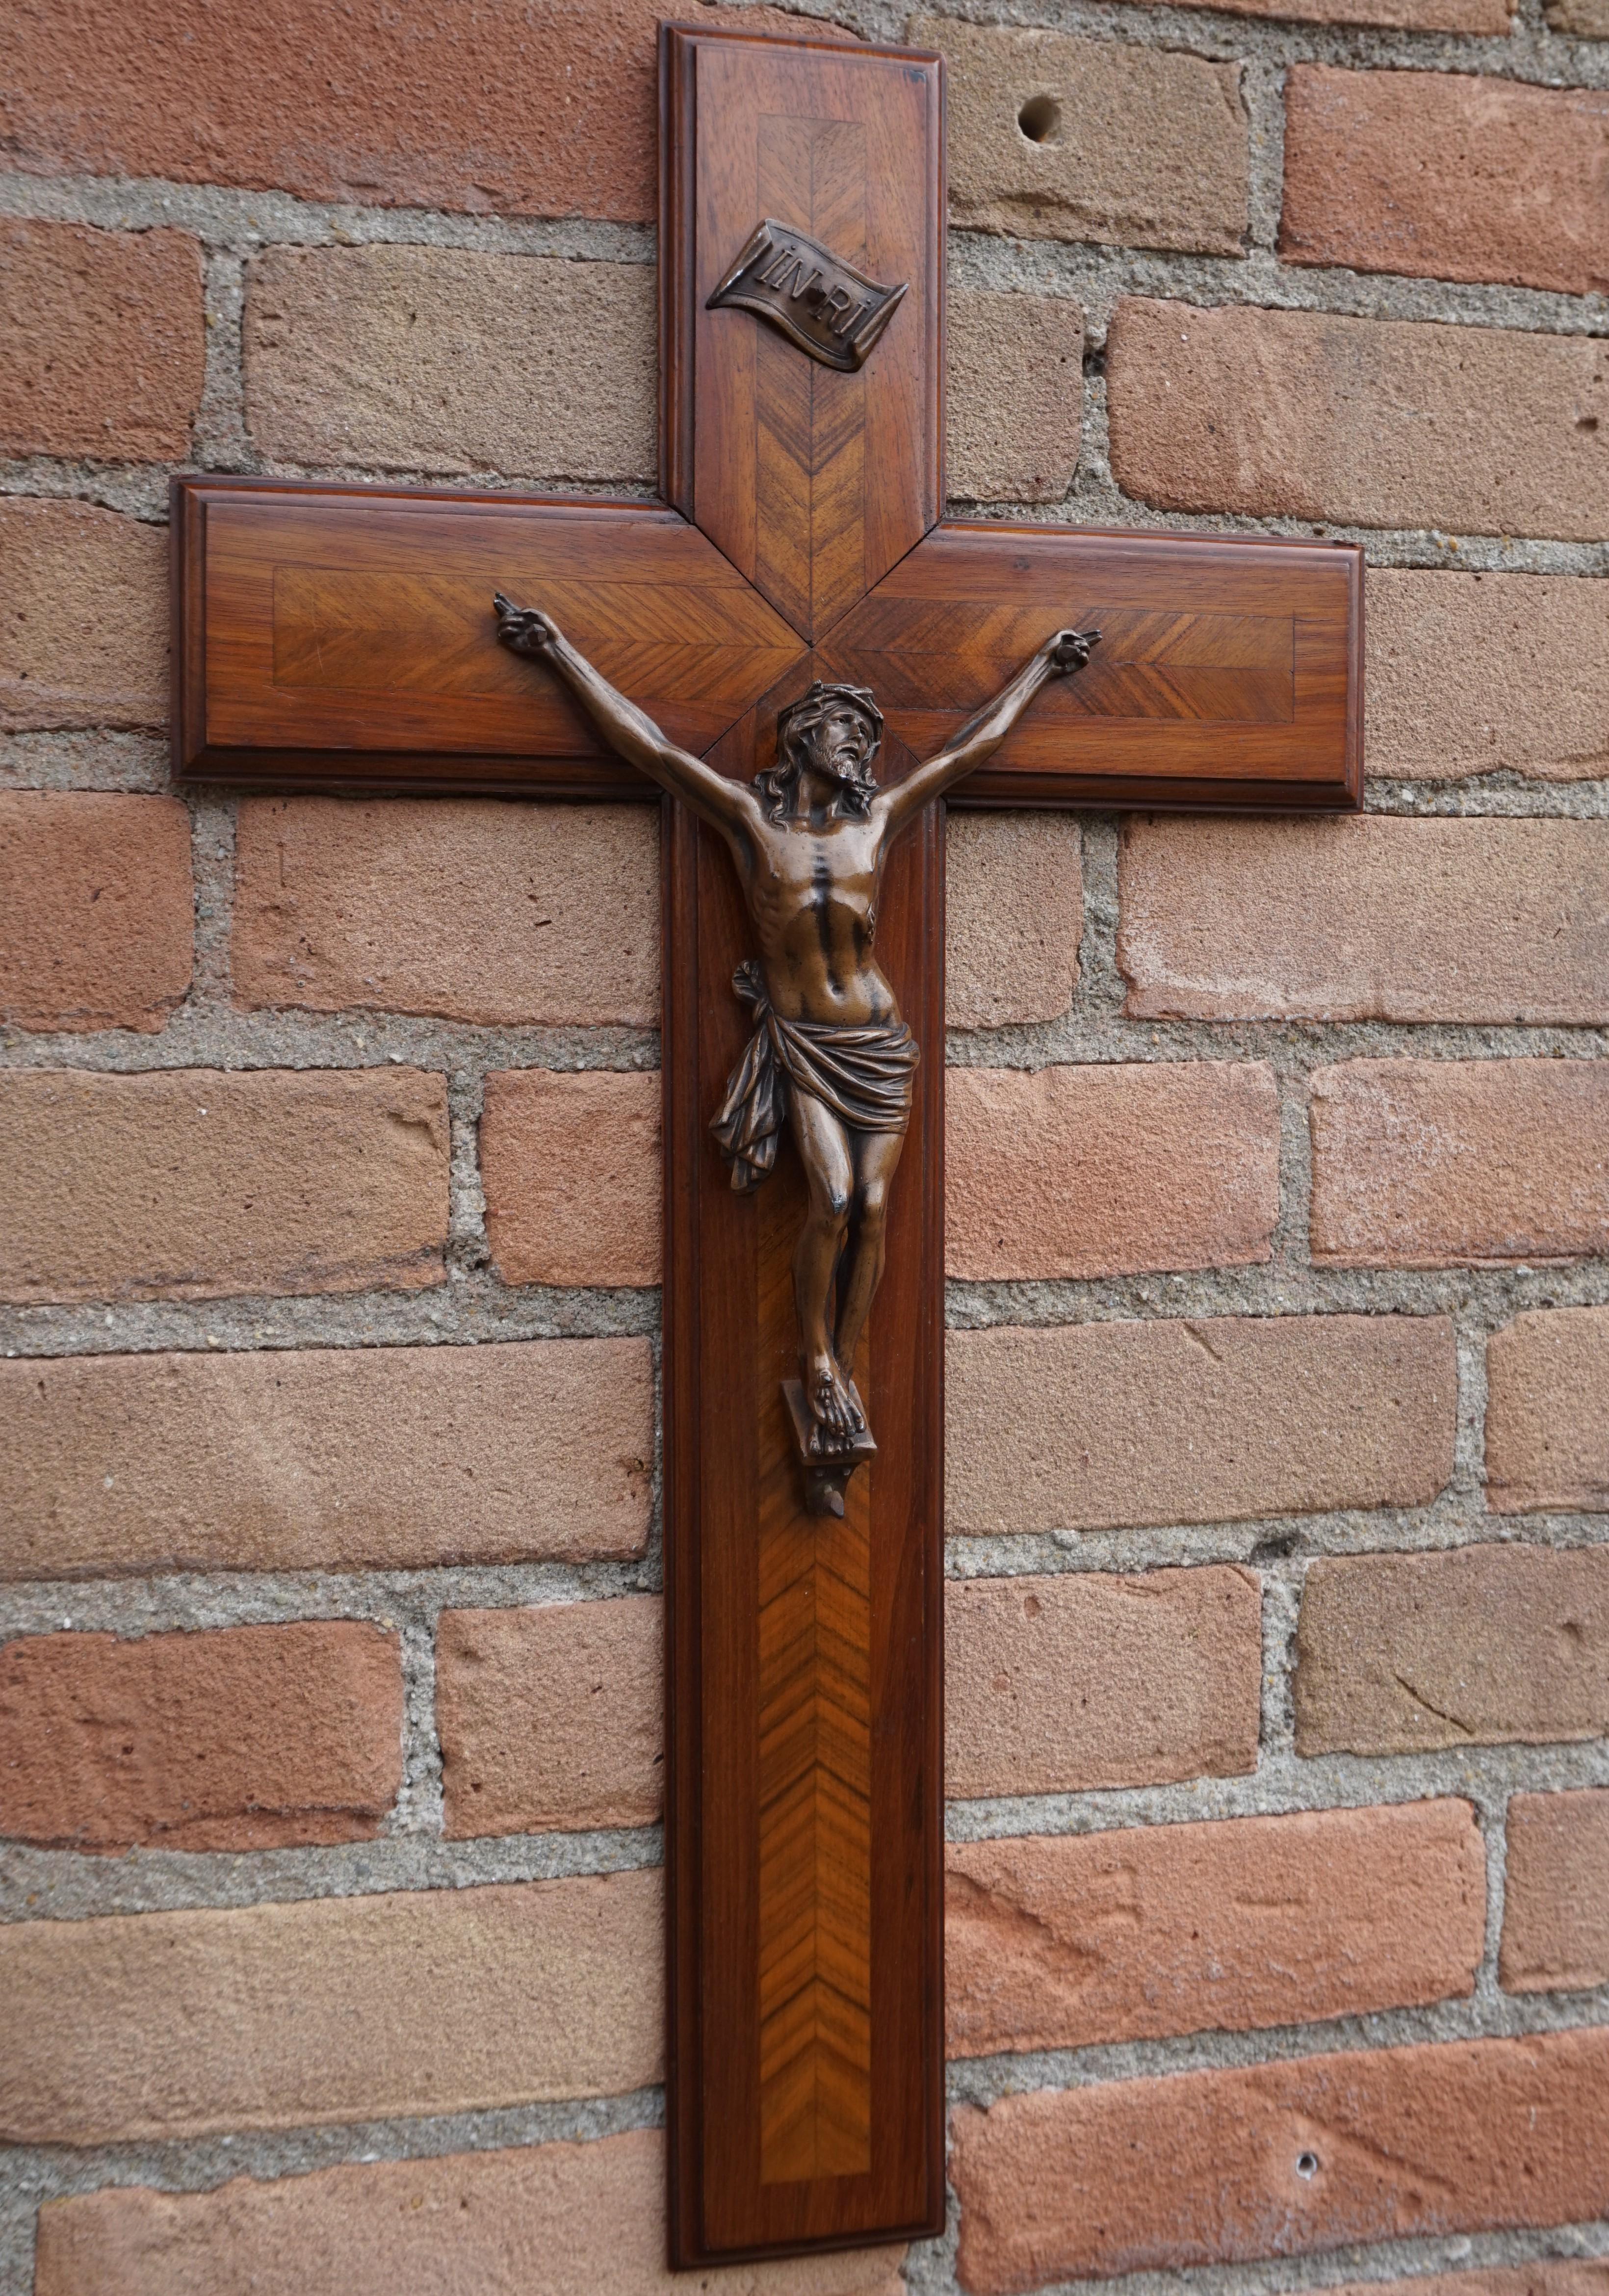 Exceptional wooden cross with a highly detailed corpus with maker's marks.

This handcrafted work of religious art from early 20th century France, is a real eyecatcher. The combination of the warm colors of the beautifully inlaid, wooden cross and